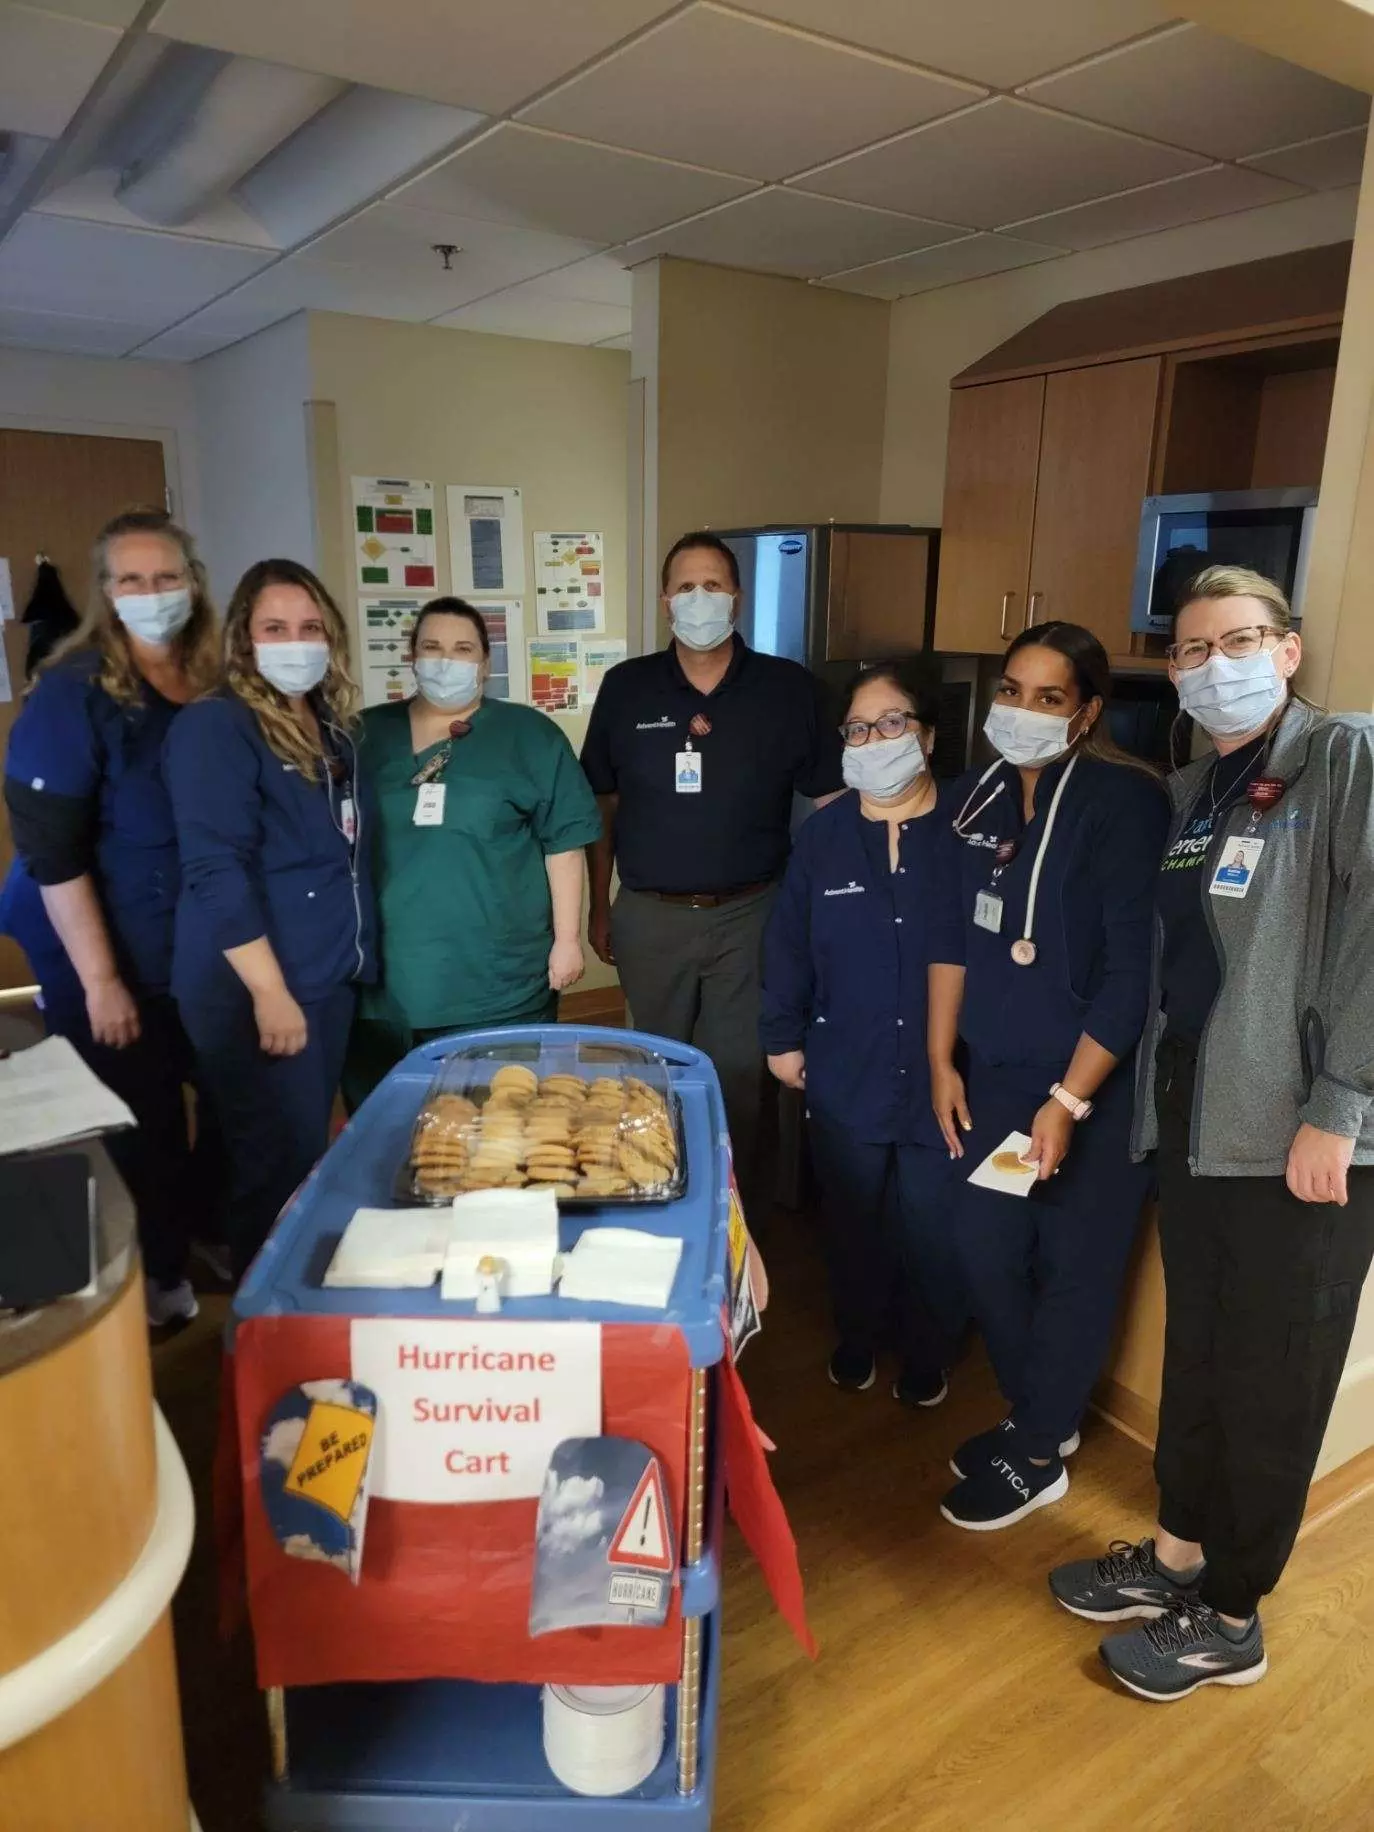 At AdventHealth Heart of Florida, fresh cookies were baked for team members and distributed on a “hurricane survival cart” to bring cheer as wind and rain battered the area.